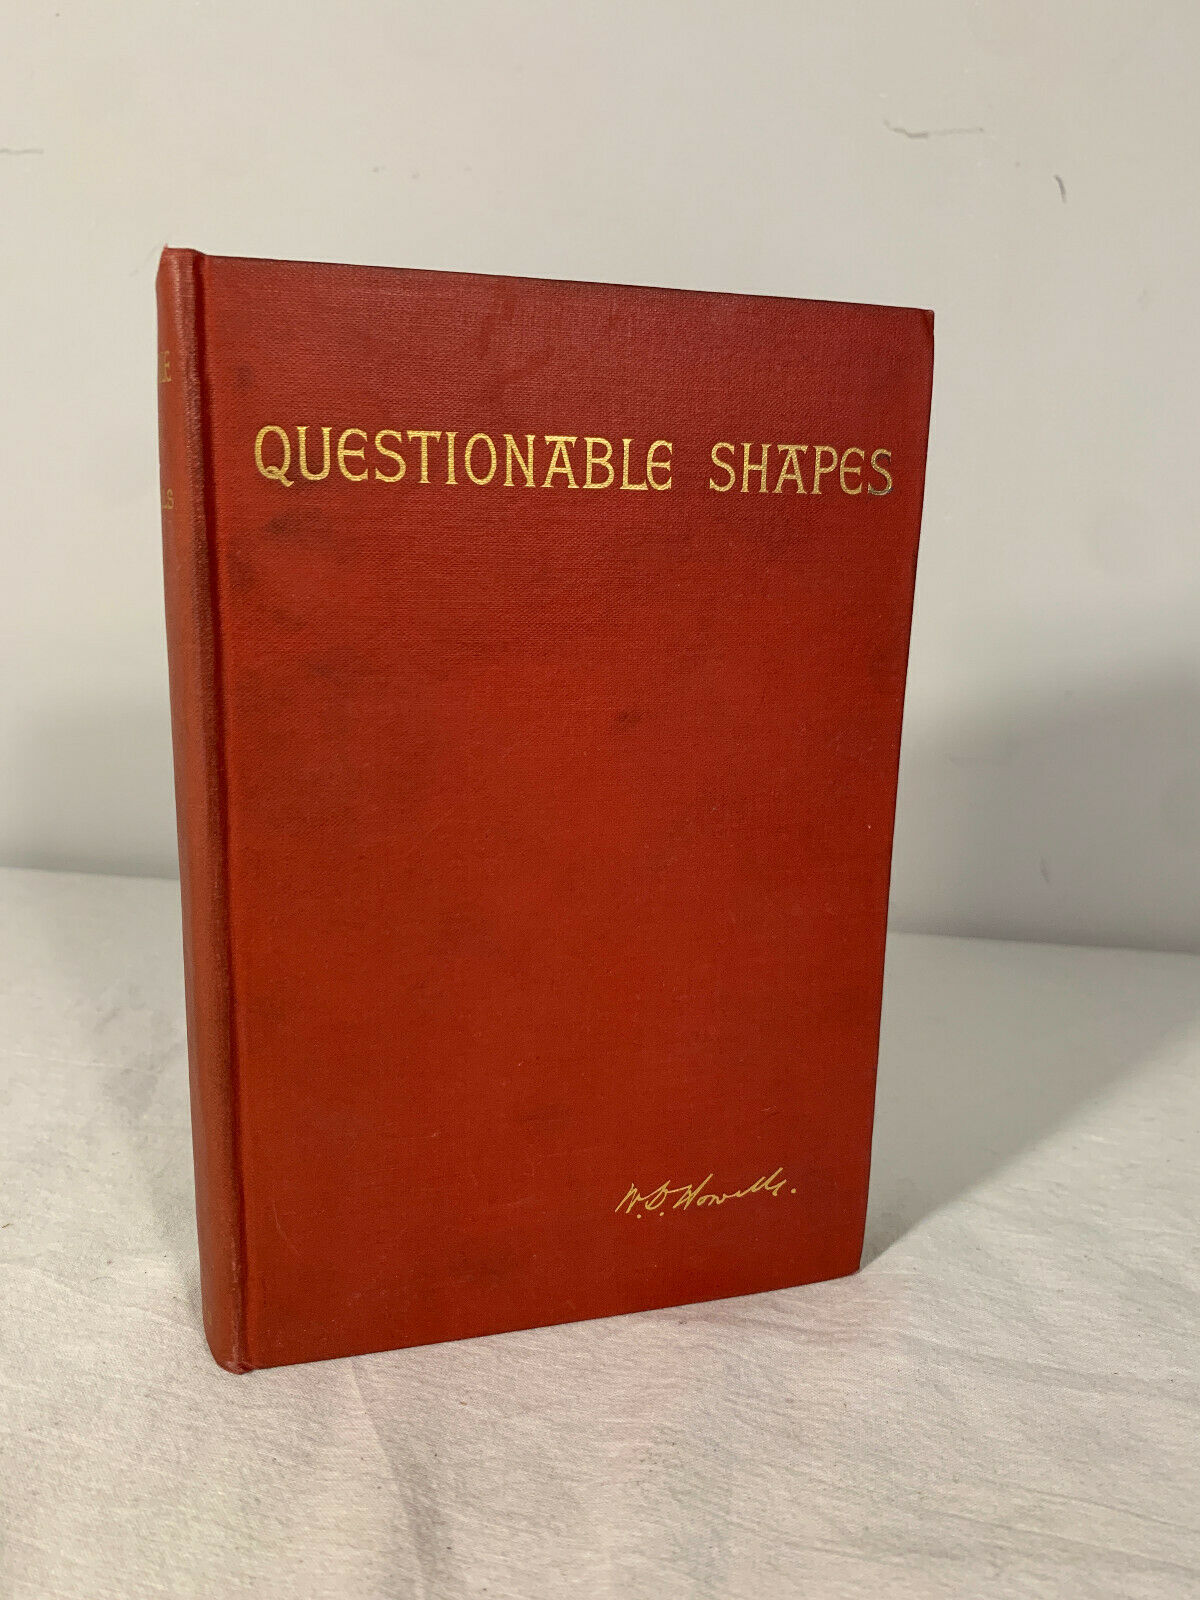 Questionable Shapes by W.D Howells [1903 · 1st Edition]